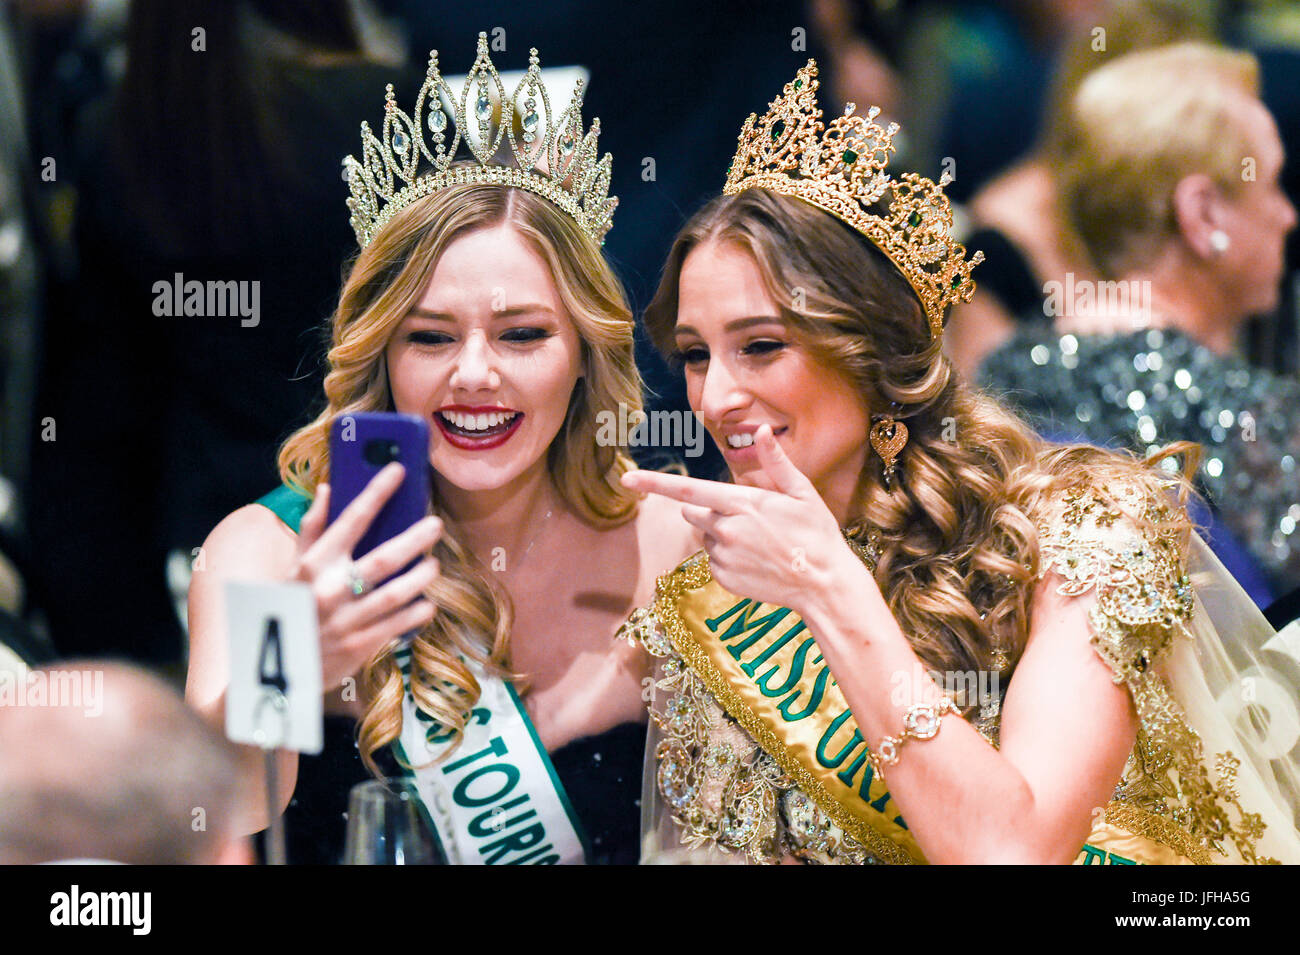 Sydney, Australia. 30th June, 2017. Miss Tourism Global 2016, Tasha Ross (L) and Miss Grand International 2015, Claire Parker (R), spotted at the Miss Grand Australia 2017 event. Claire Parker is the 2nd Australian to win an international pageant after Jennifer Hawkins (Miss Universe 2004). Credit: United Images/Pacific Press/Alamy Live News Stock Photo